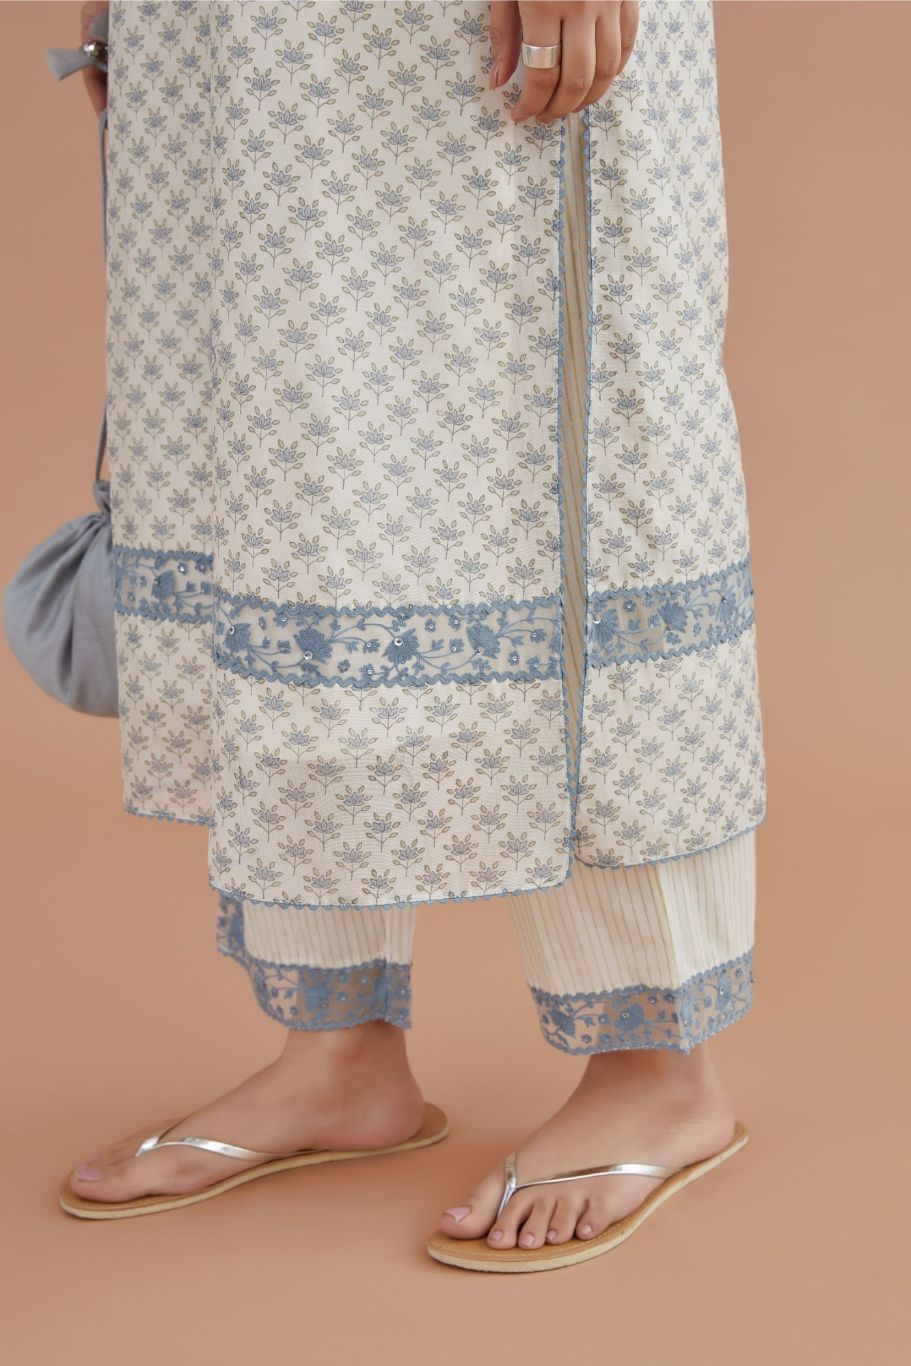 Off white silk chander kurta set with blue lotus hand block print, highlighted with blue thread embroidery inset and rickrack lace